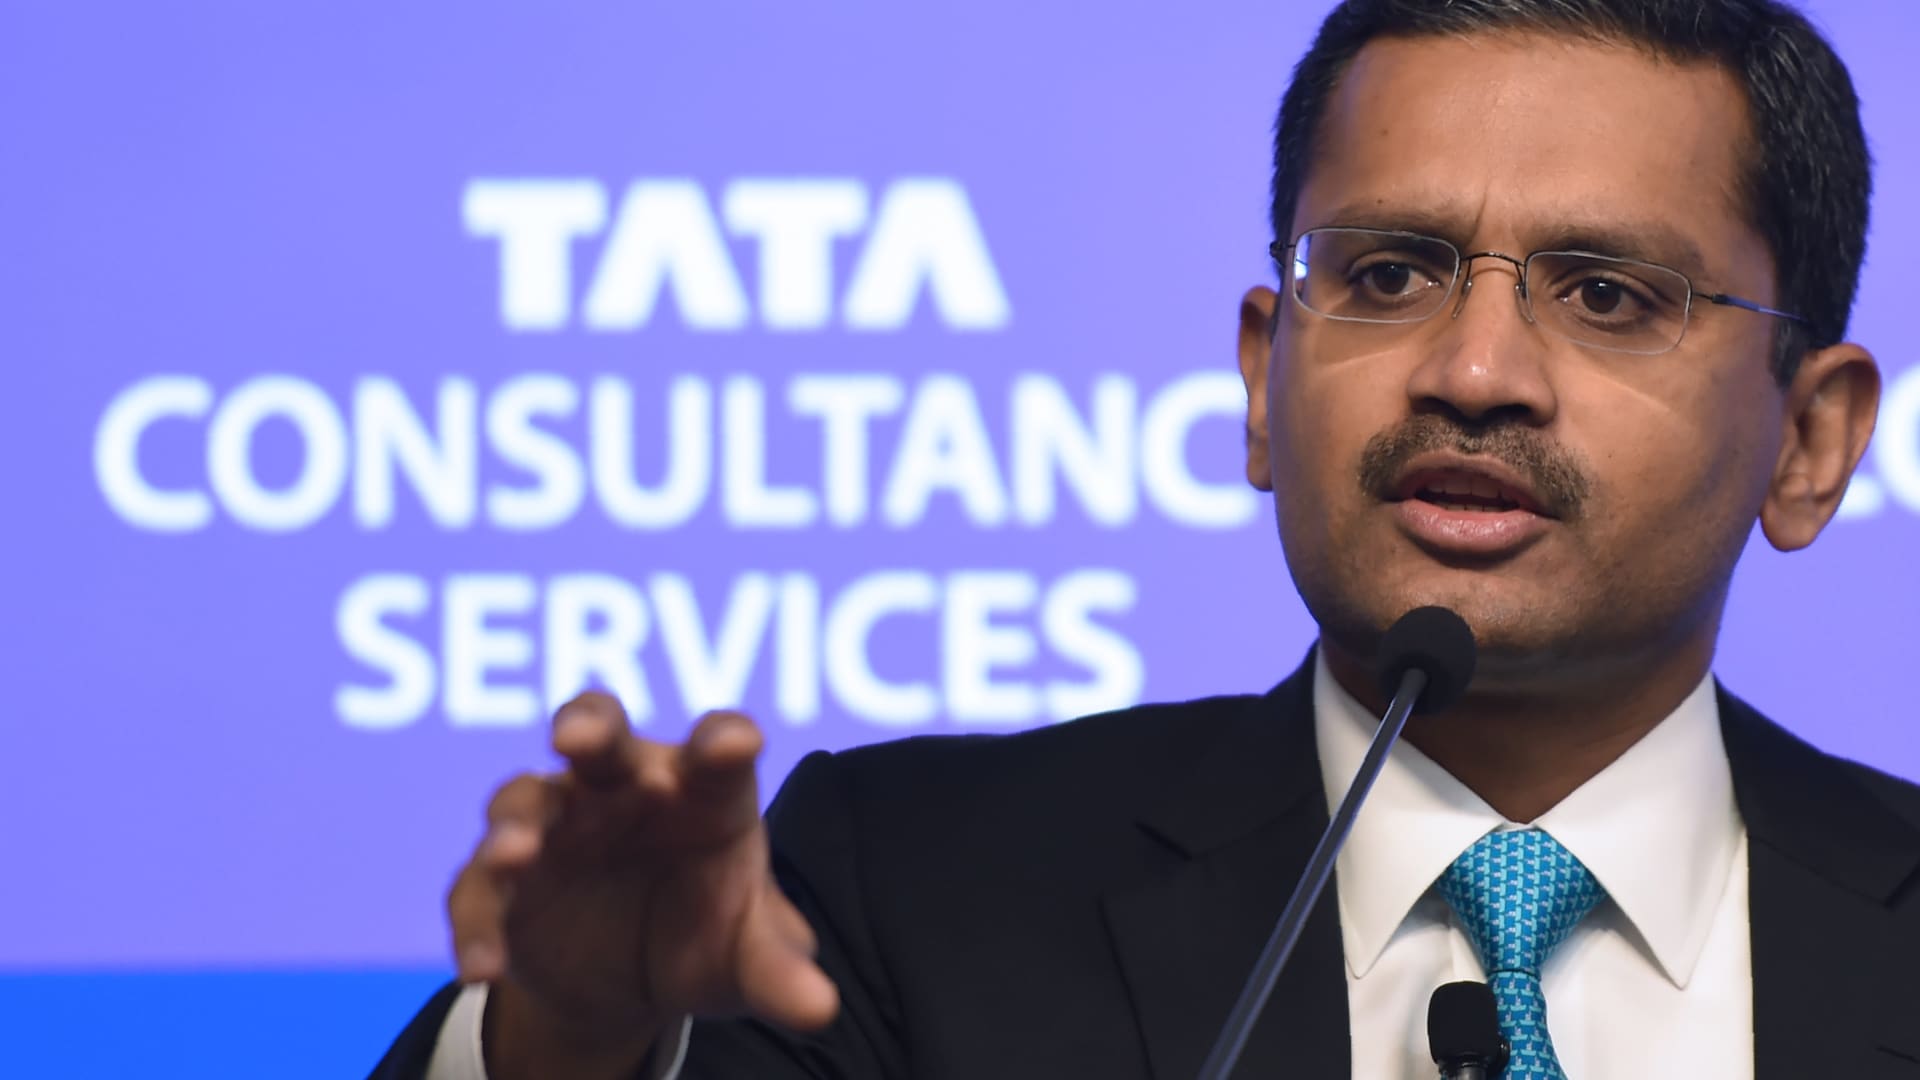 India's Tata Consultancy Services (TCS) CEO and Managing Director Rajesh Gopinathan speaks during a news conference after the announcement of the financial results of the company in Mumbai on April 19, 2018.